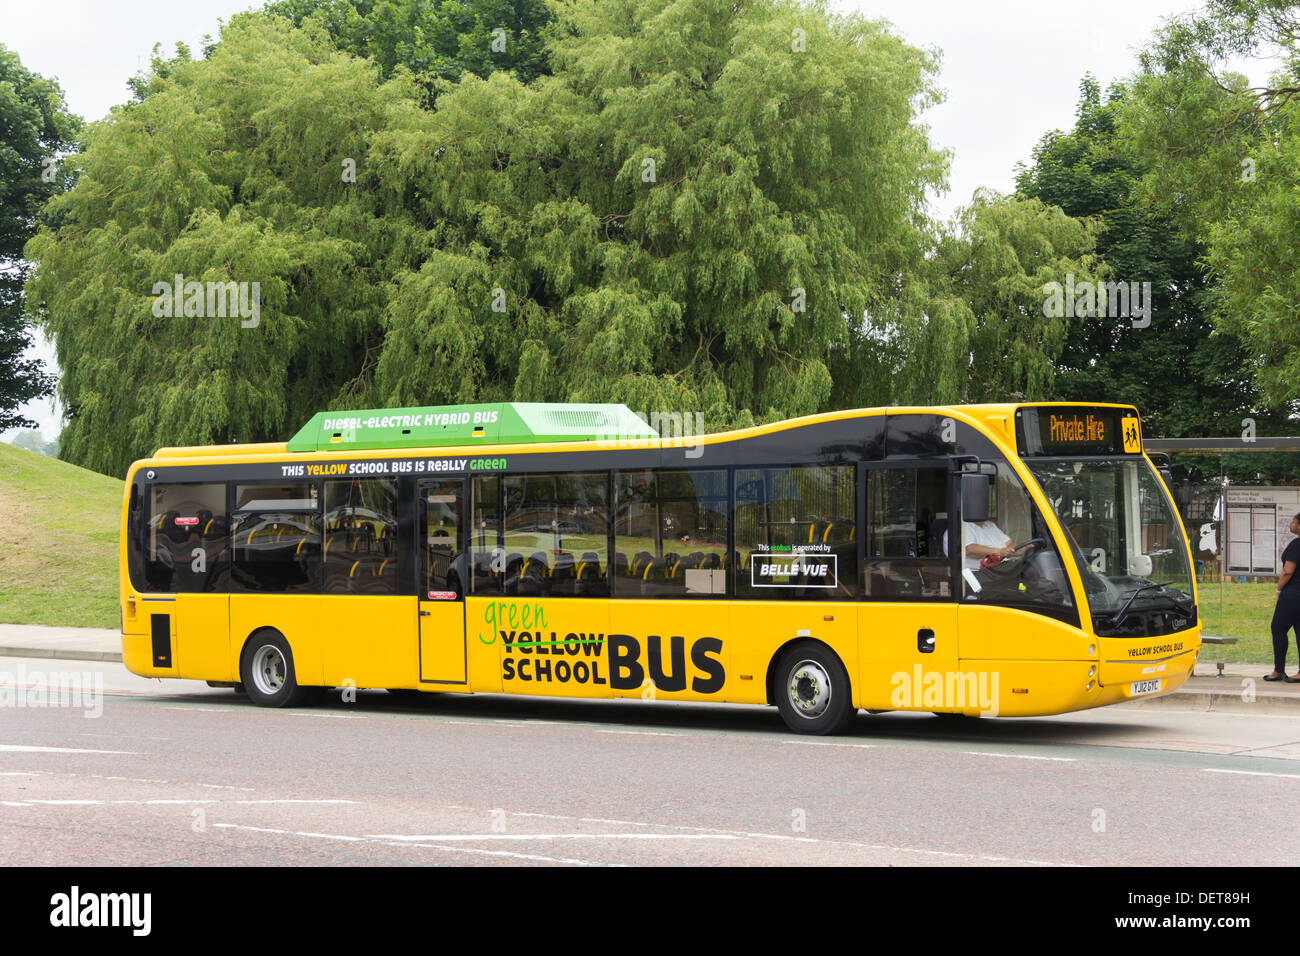 A yellow school bus (UK variety) in Manchester. The vehicle is an Optare Versa Hybrid low diesel/electric emission vehicle. Stock Photo